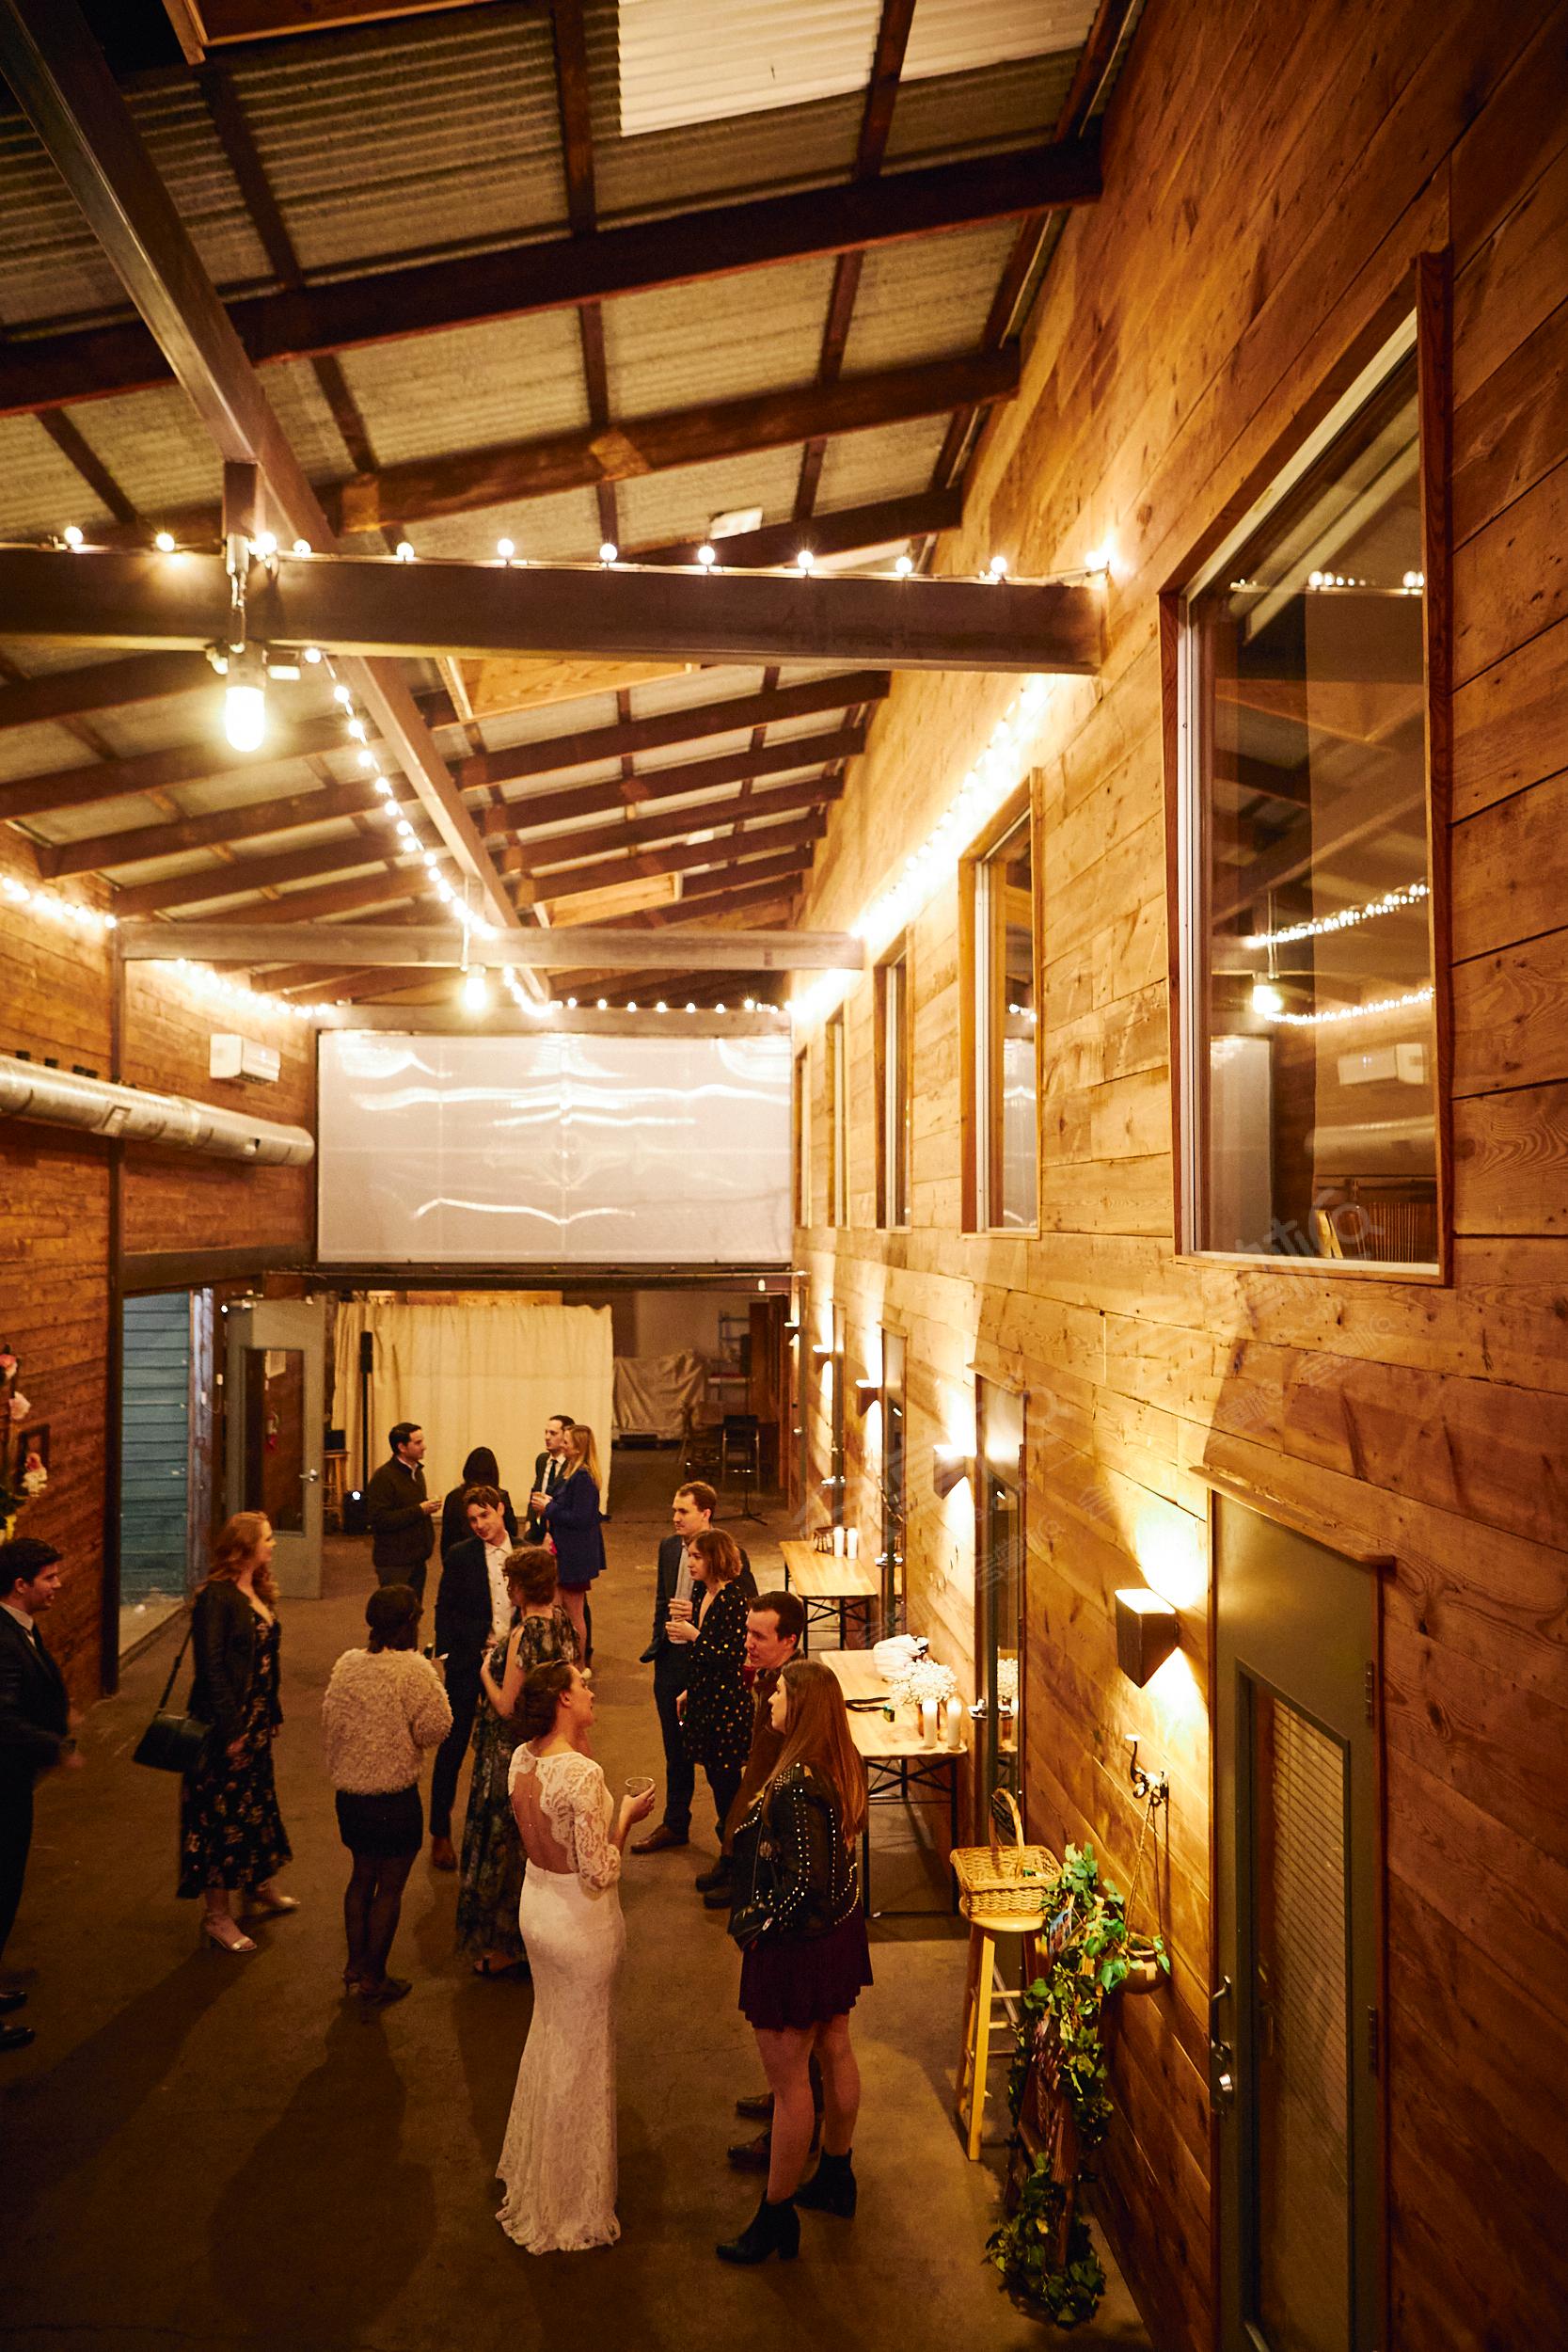 Beautiful Warehouse Rental for Weddings, Photo/Video Productions, Events, Coworking, Etc.